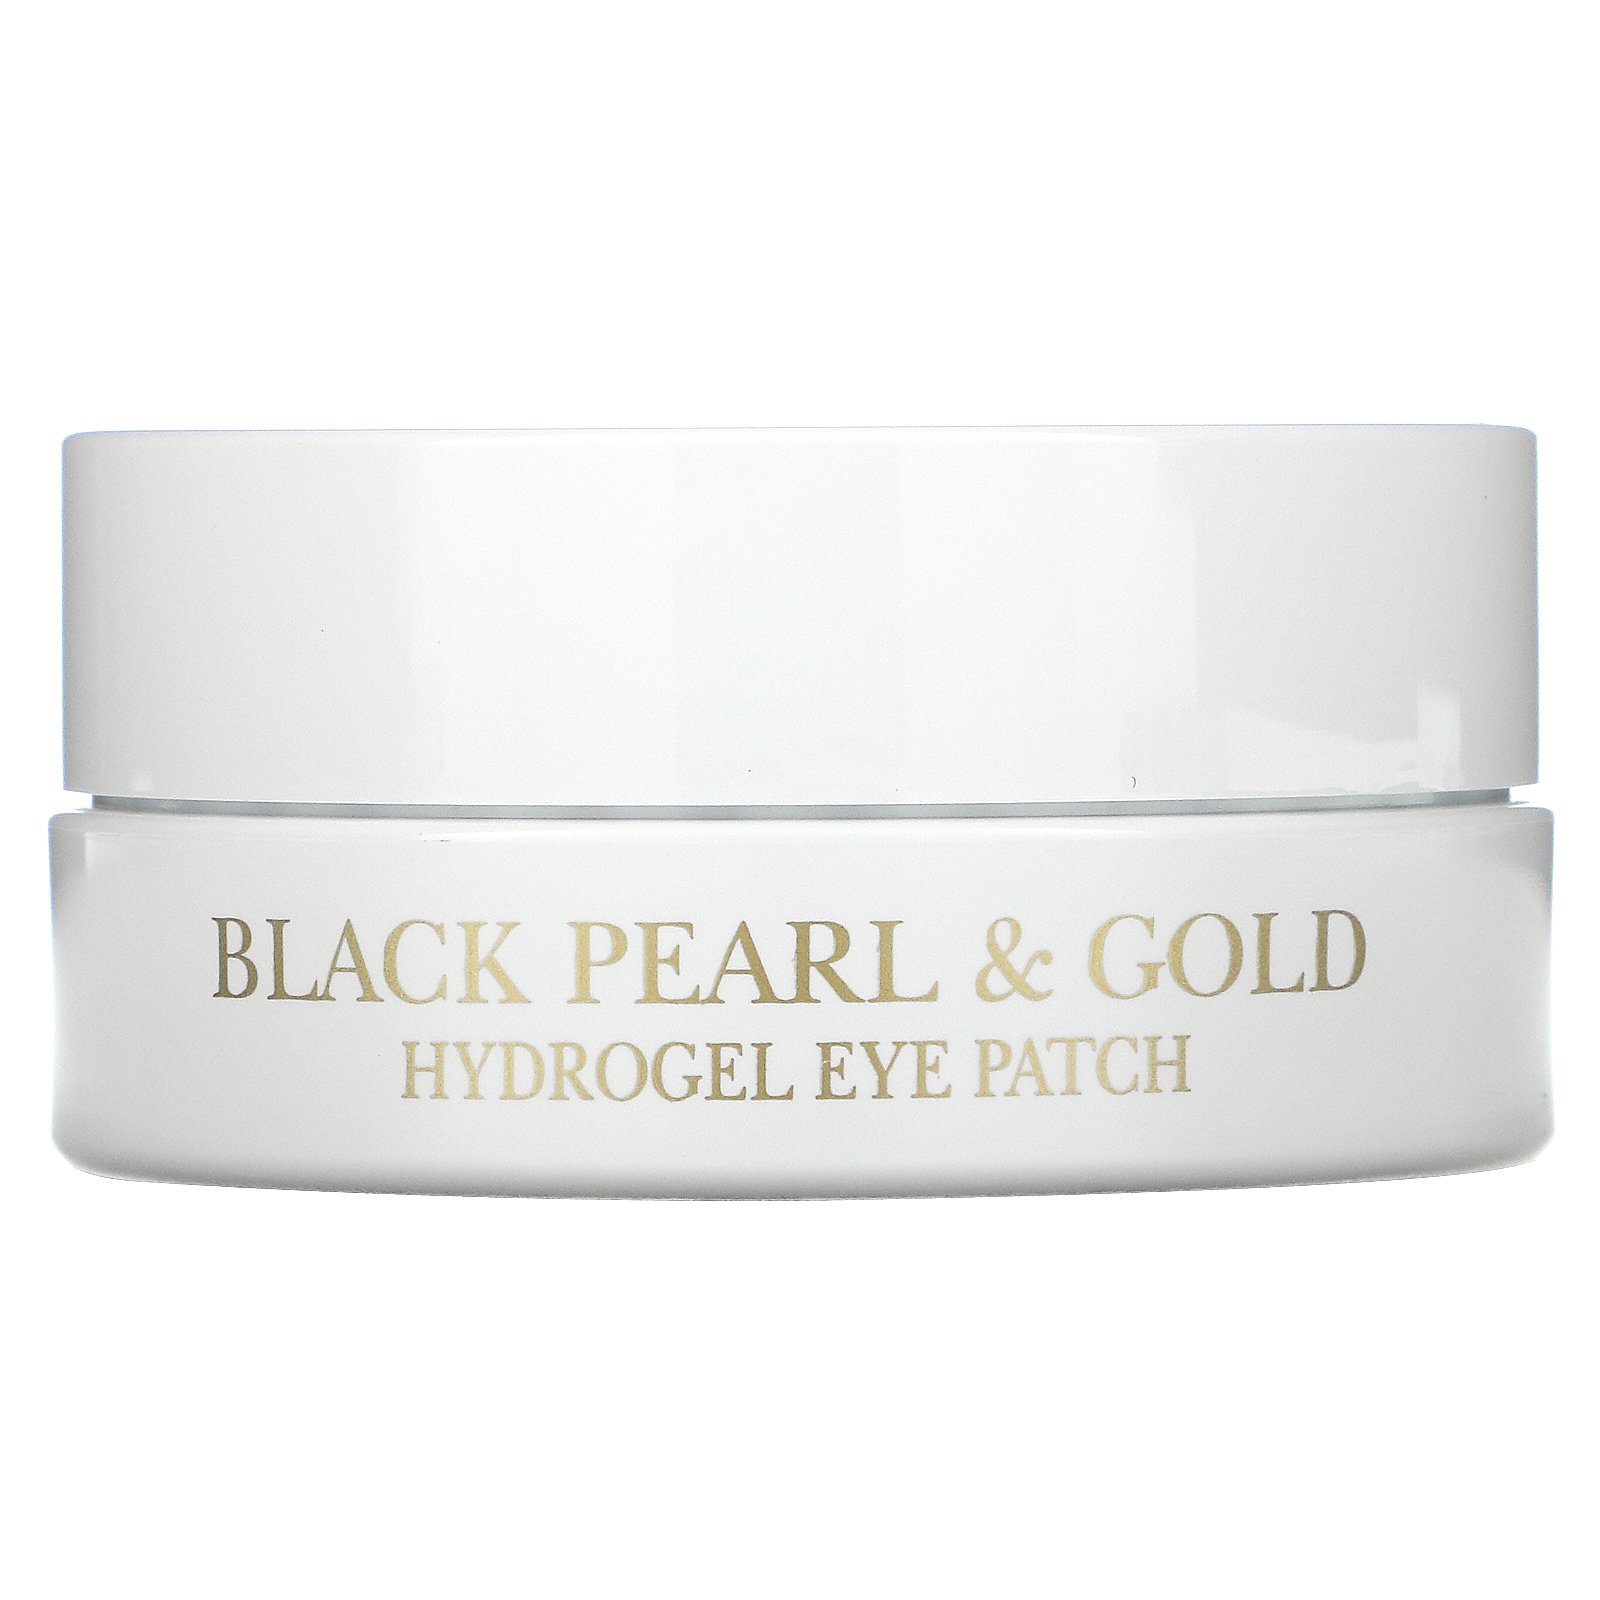 Petitfee Black Pearl & Gold Hydrogel Eye Patch, 60 Patches - image 4 of 4